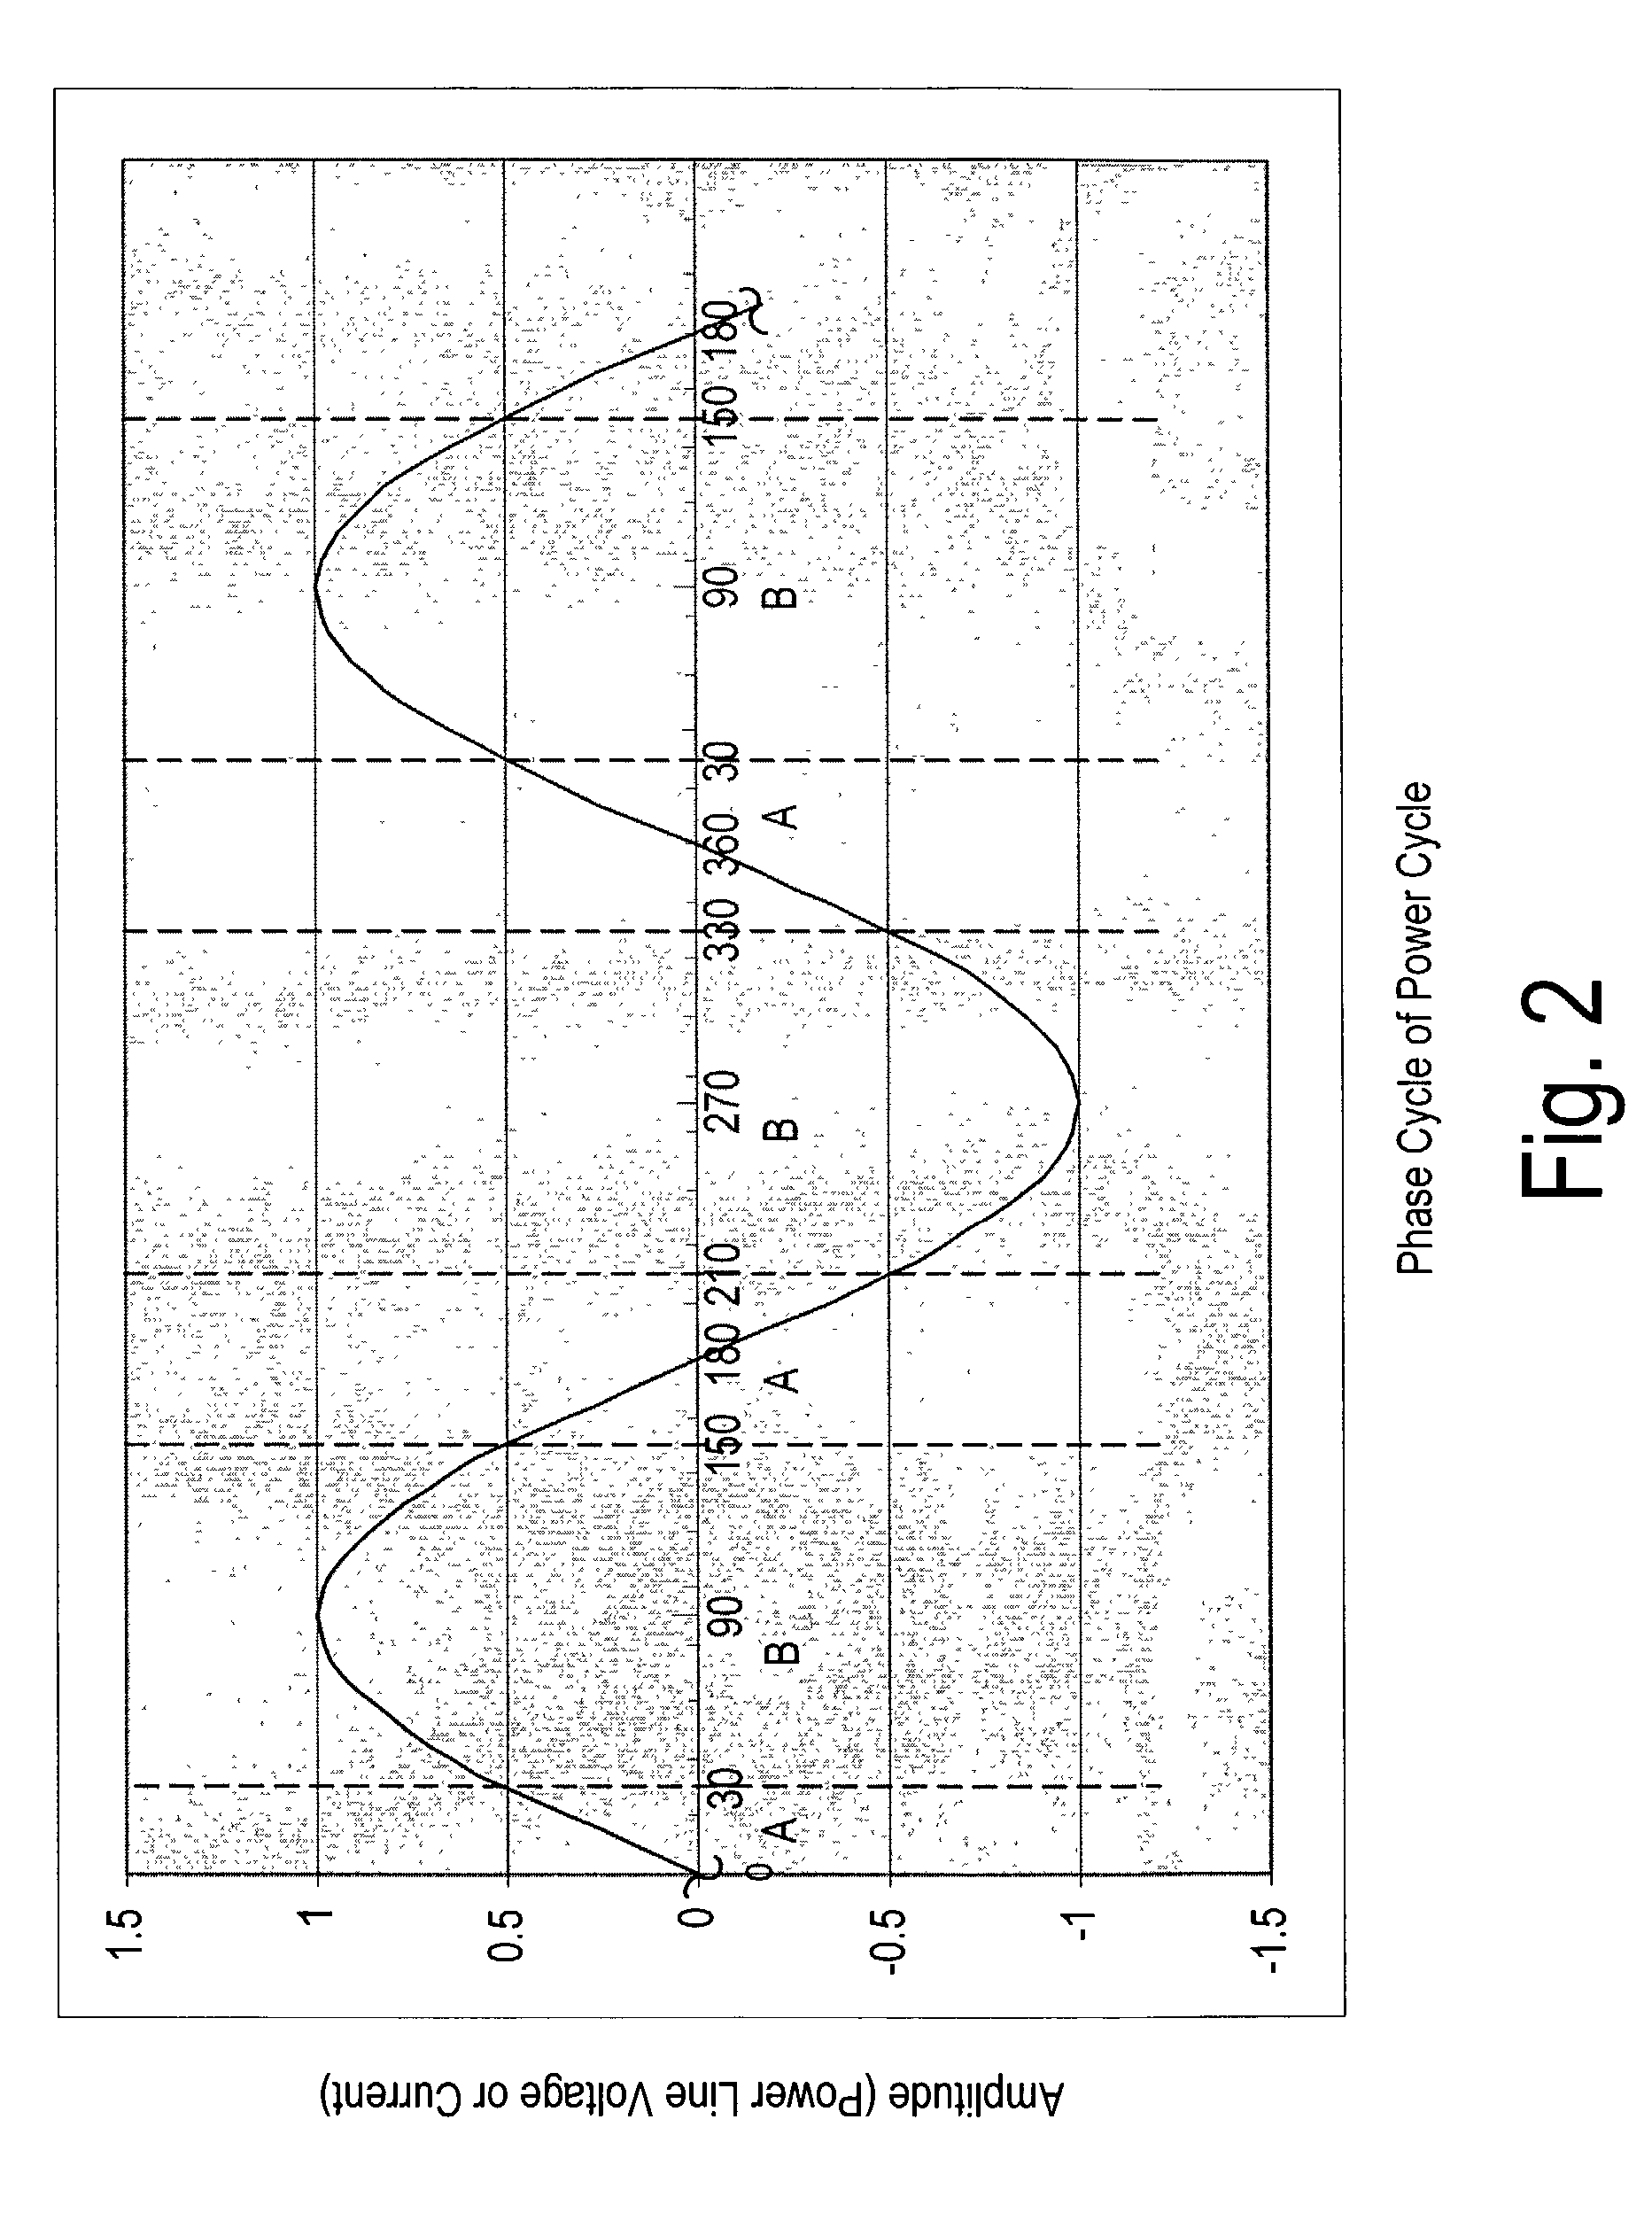 Method and system to increase the throughput of a communications system that uses an electrical power distribution system as a communications pathway